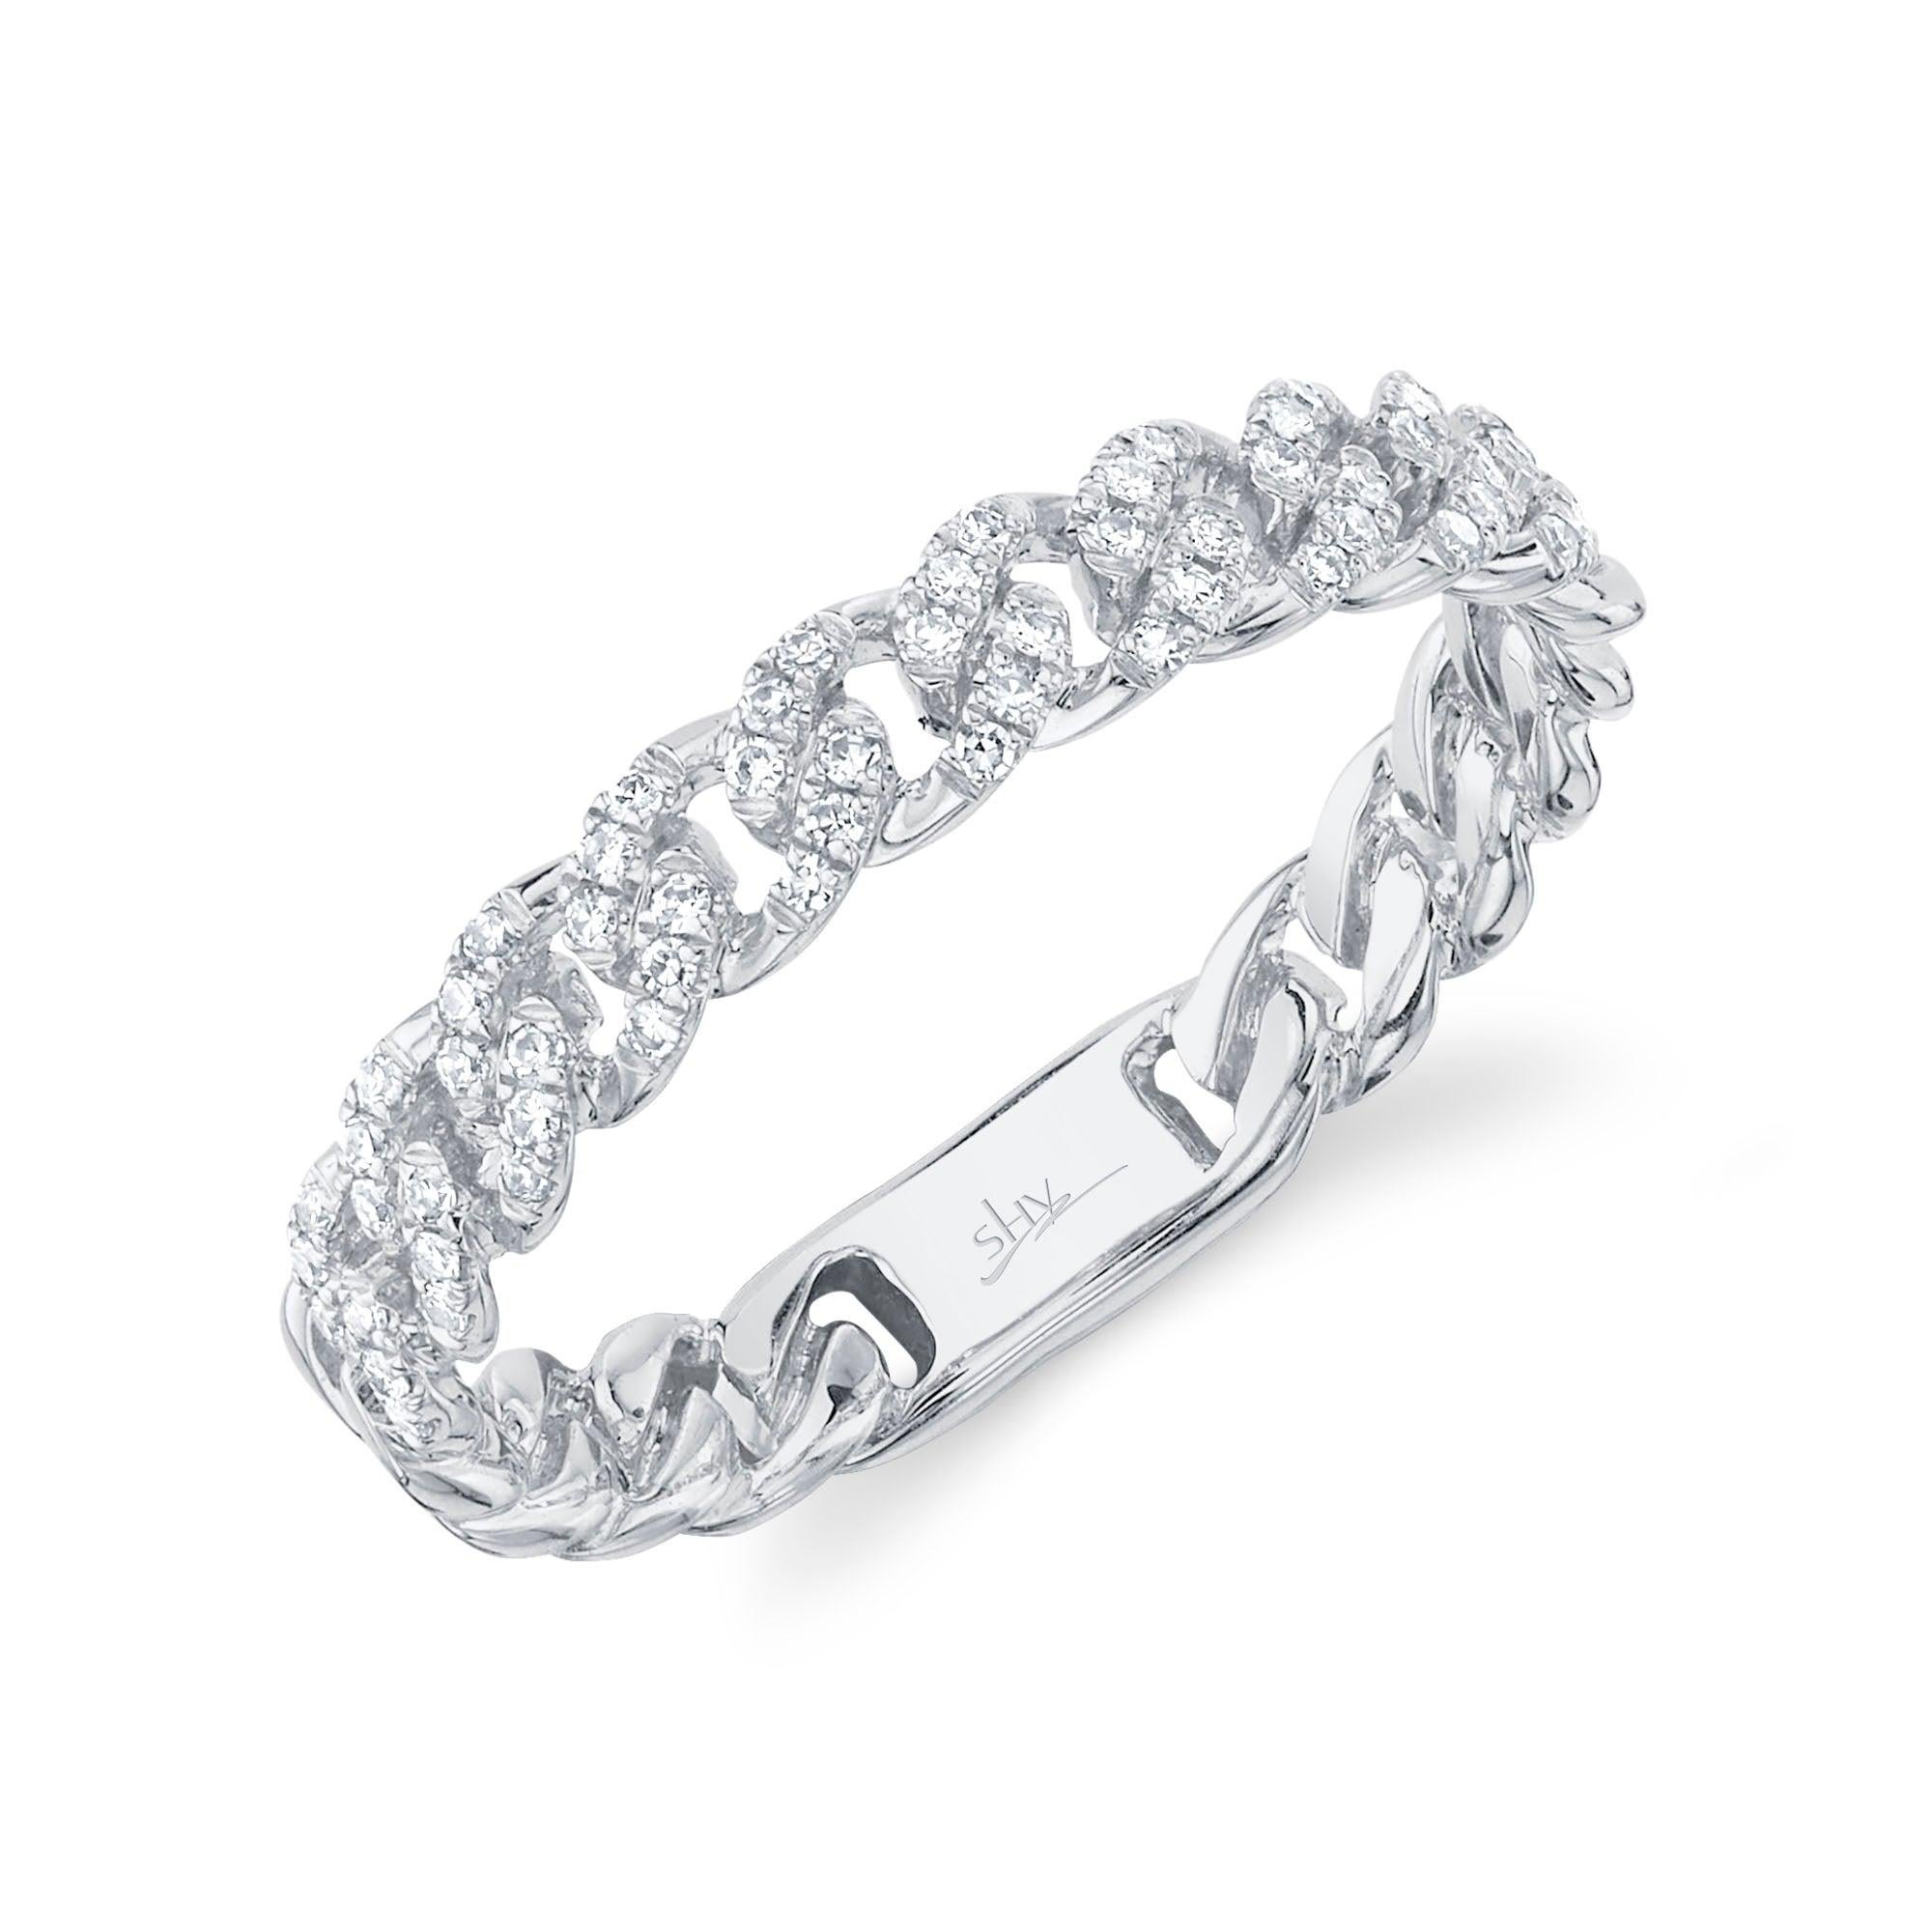 This exquisite White Gold Diamond Pave Link Ring will add the perfect touch of sparkle for any occasion. Crafted with 14K white gold and pave diamonds, this timeless piece will become your favorite accessory.
White Gold Diamond Pave Link Ring.
Size